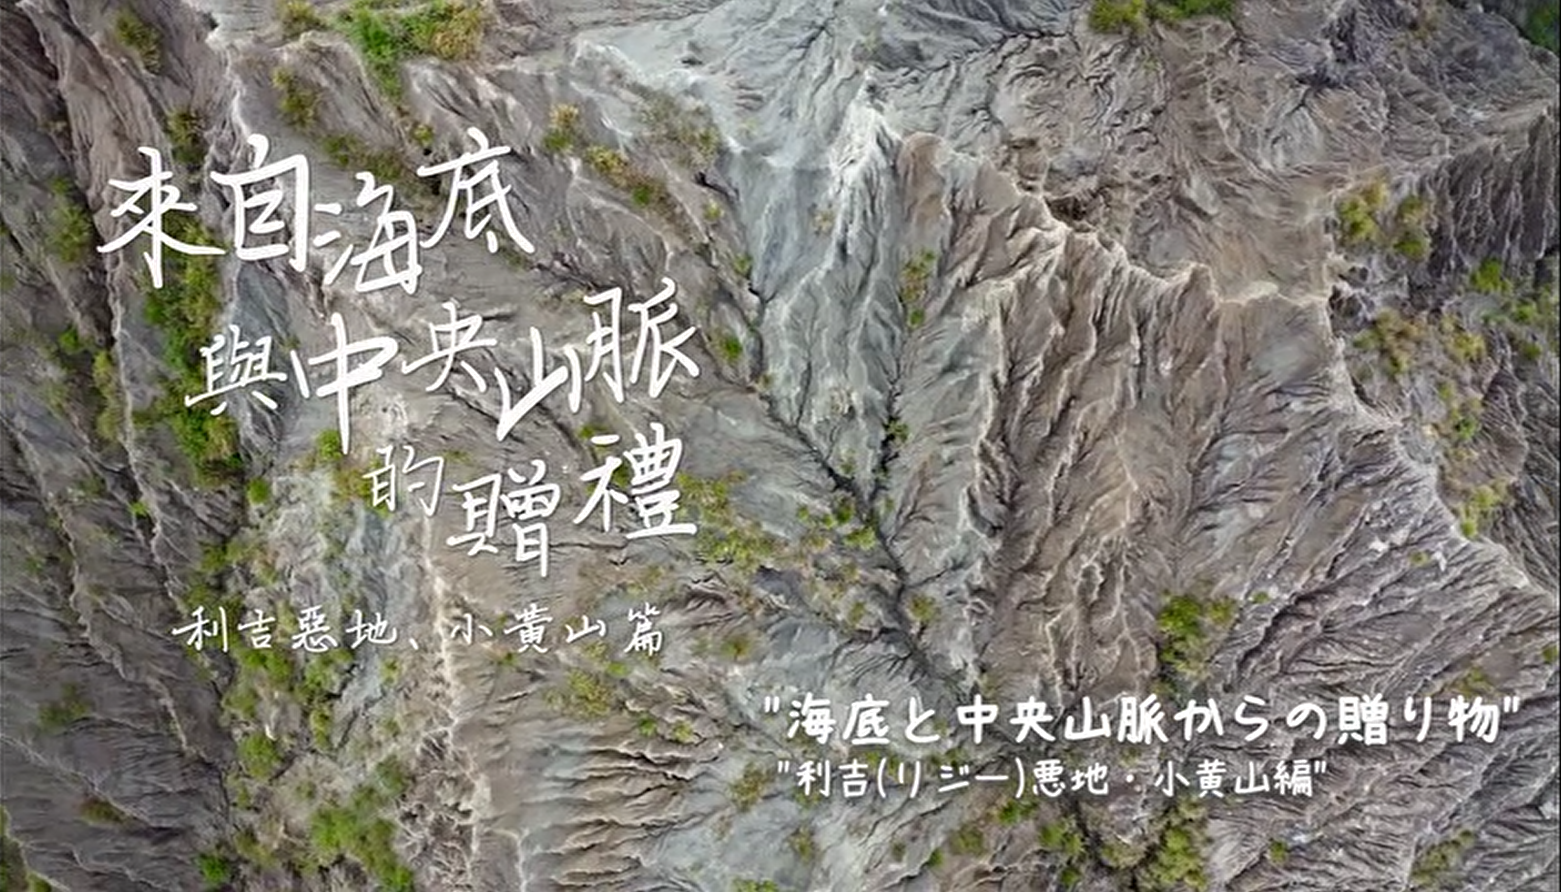 East Rift Valley Geological Landscape Tourism Promotional Video：Gifts from the Seabed and the Central Mountain Range: Liji Badland Geopark and Little Huangshan Collection Japanese